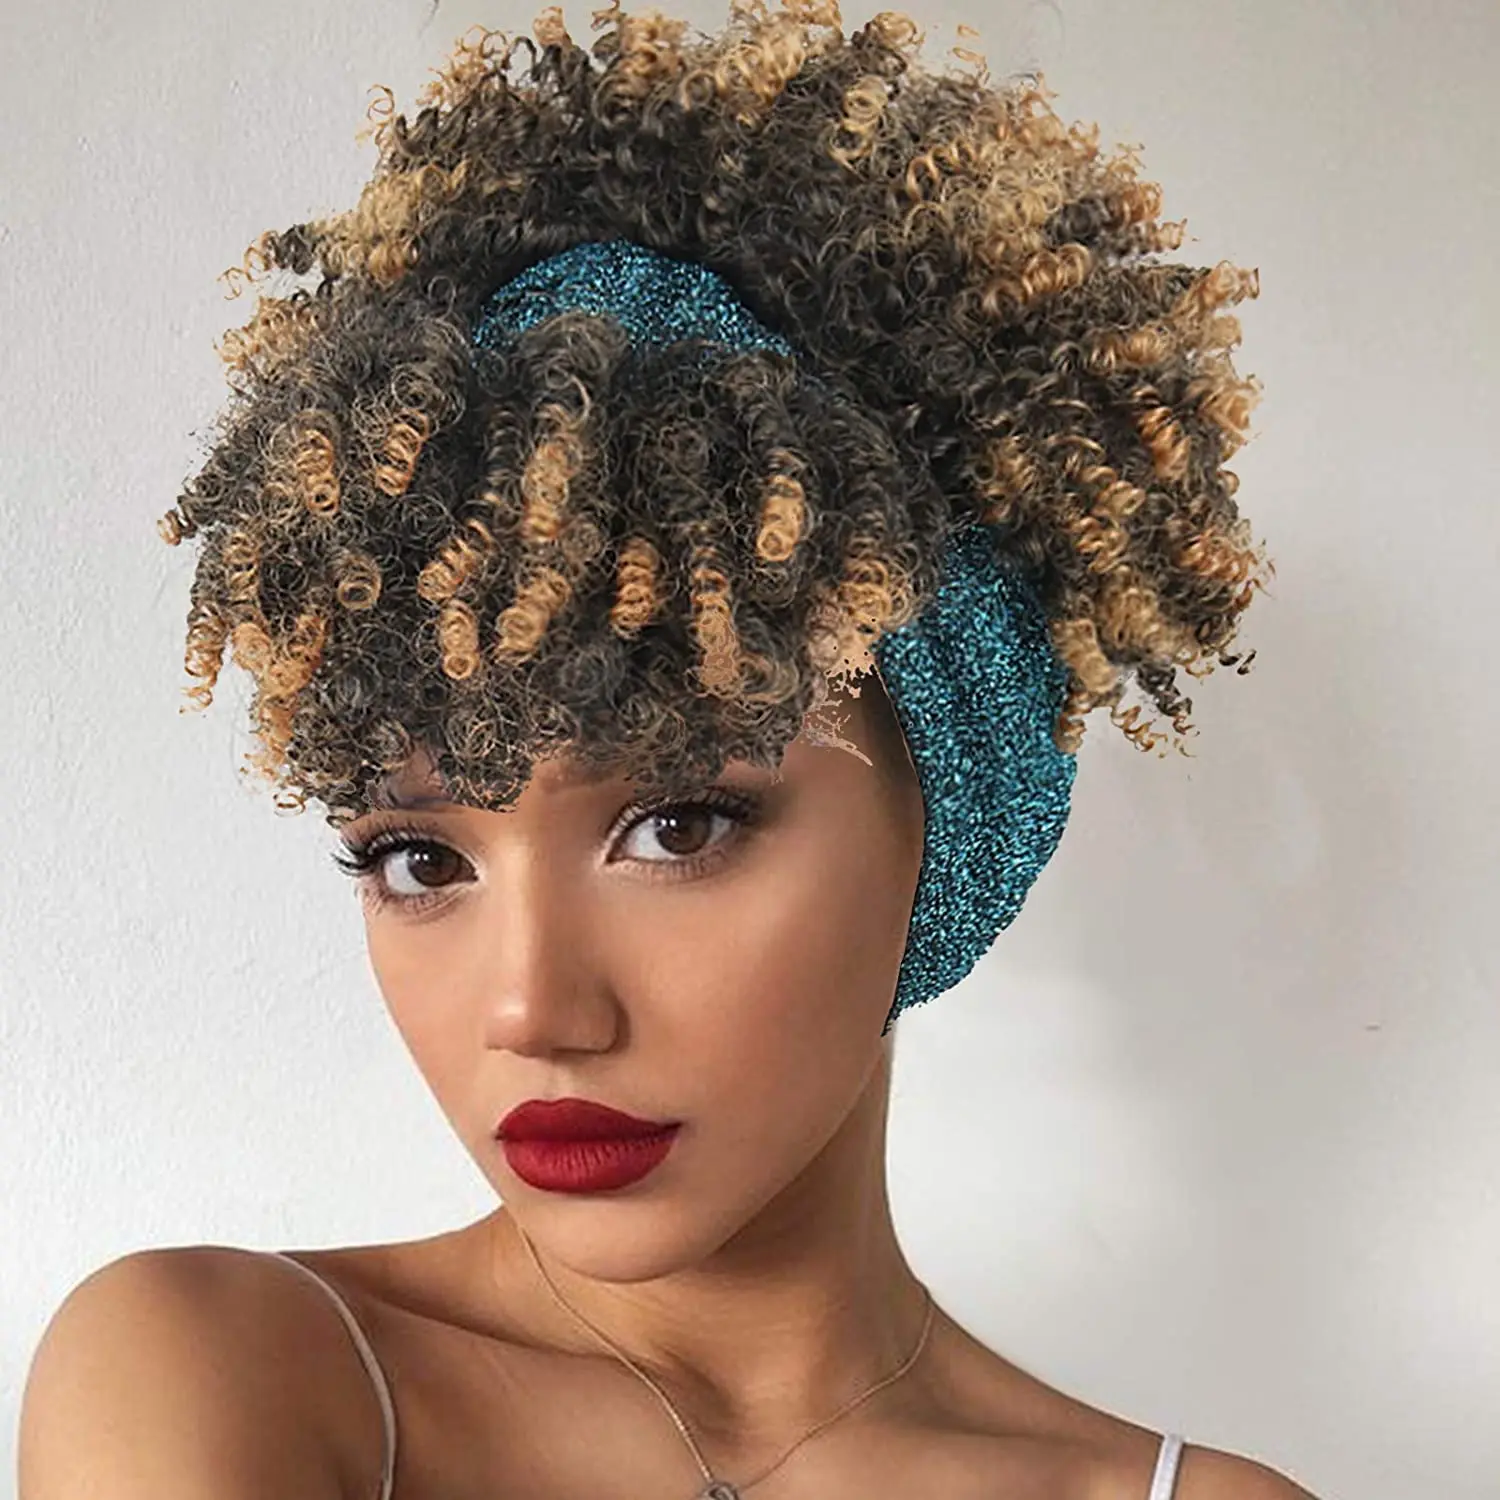 G&t Wig Afro High Puff Hair Bun With Bangs Short Kinky Curly Pineapple Hair  Extensions Headband Wig For Black Women - Buy Headband Wig,Pineapple  Wig,Ponytails With Bangs Product on 